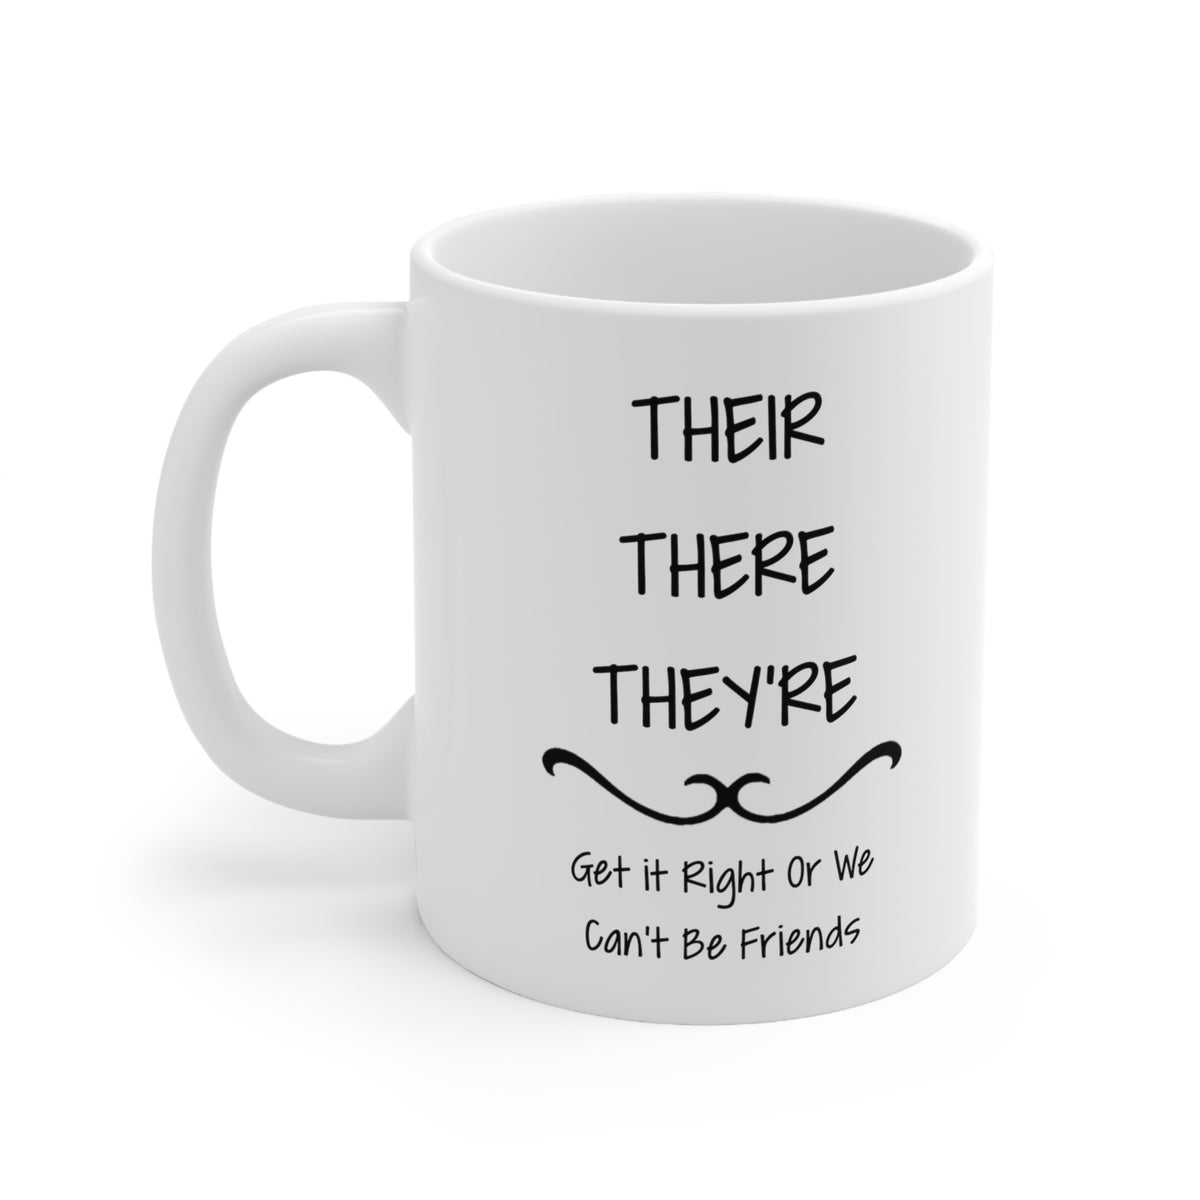 Funny Grammar Teacher Coffee Mug - THEIR THERE THEY'RE Cup - Fun Christmas Gifts for ELA ASL Teacher